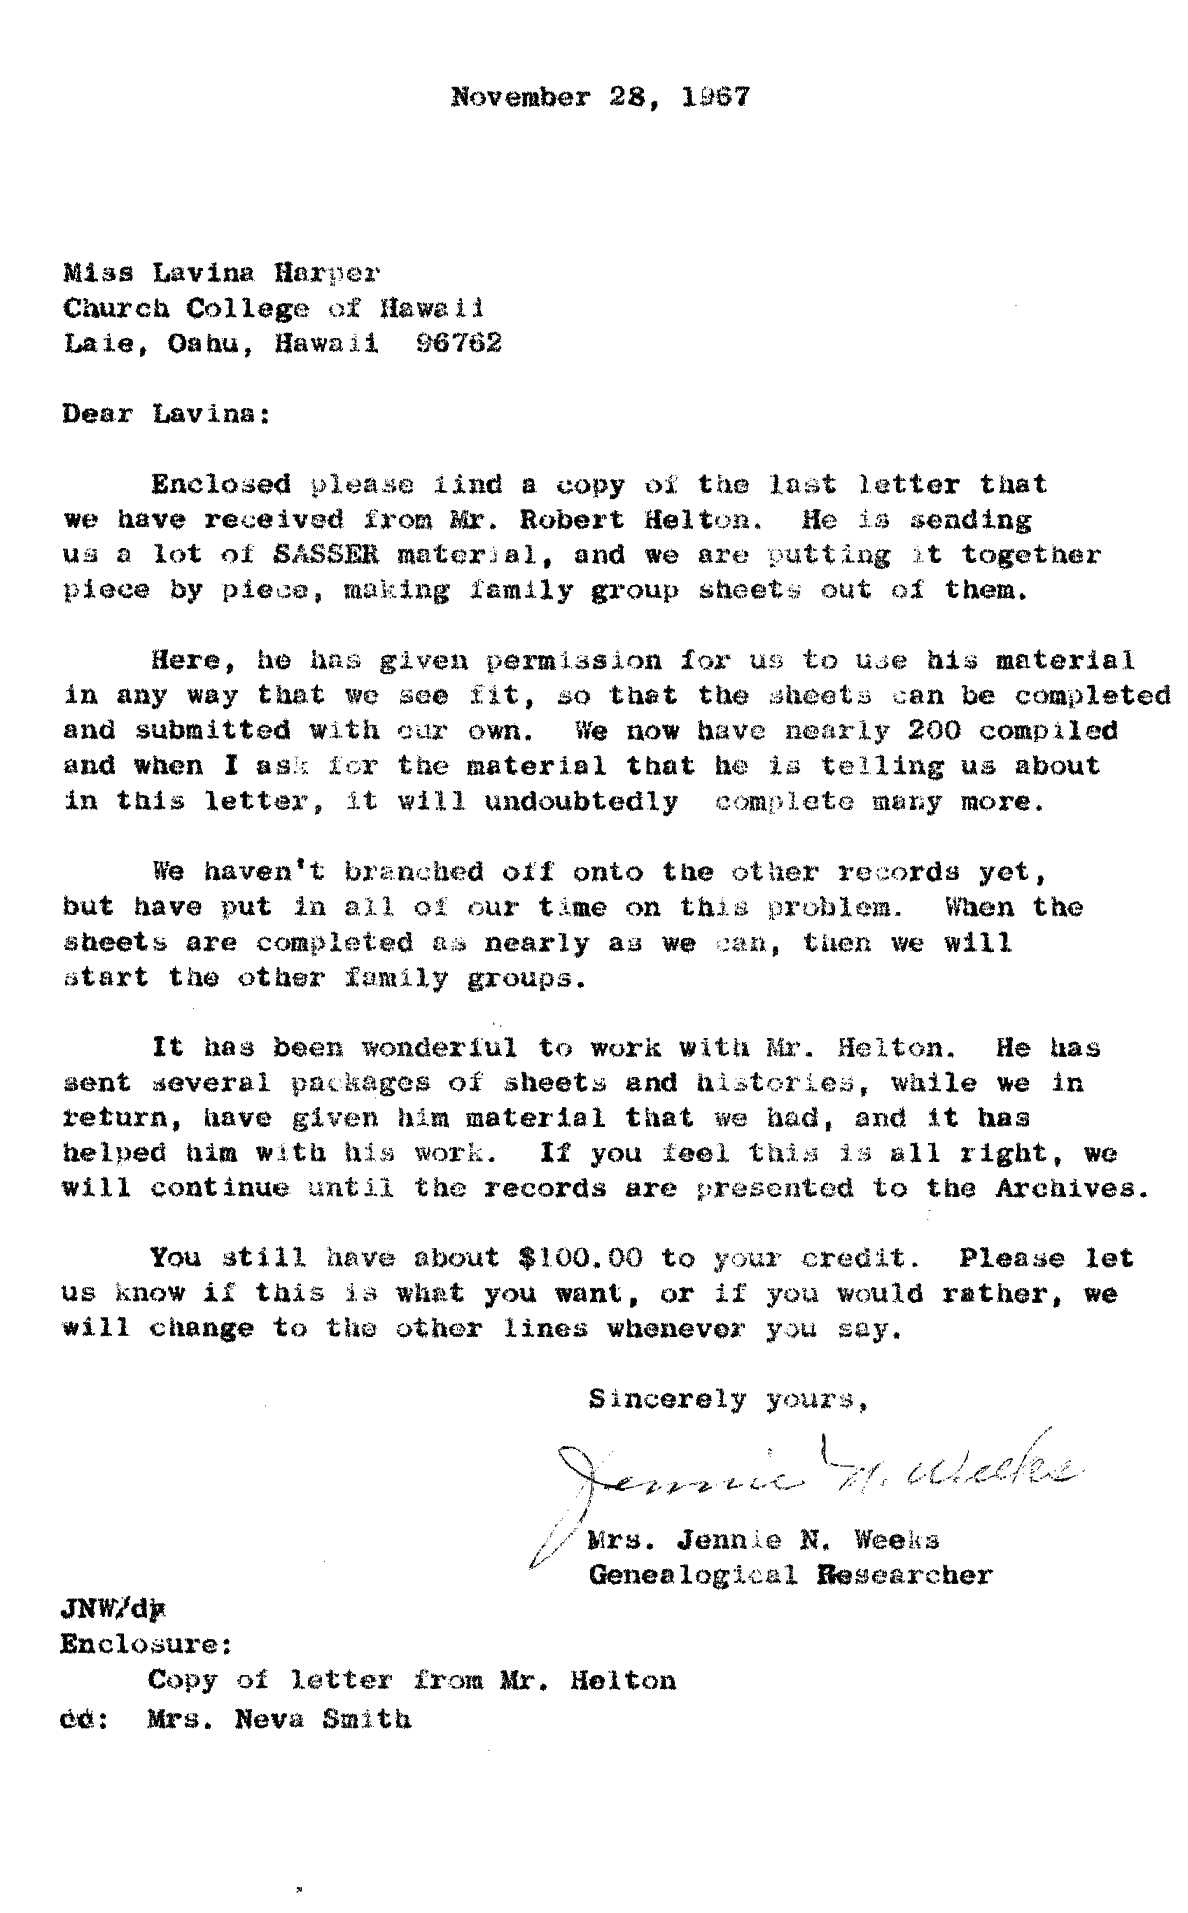 Letter from Robert Helton 4small